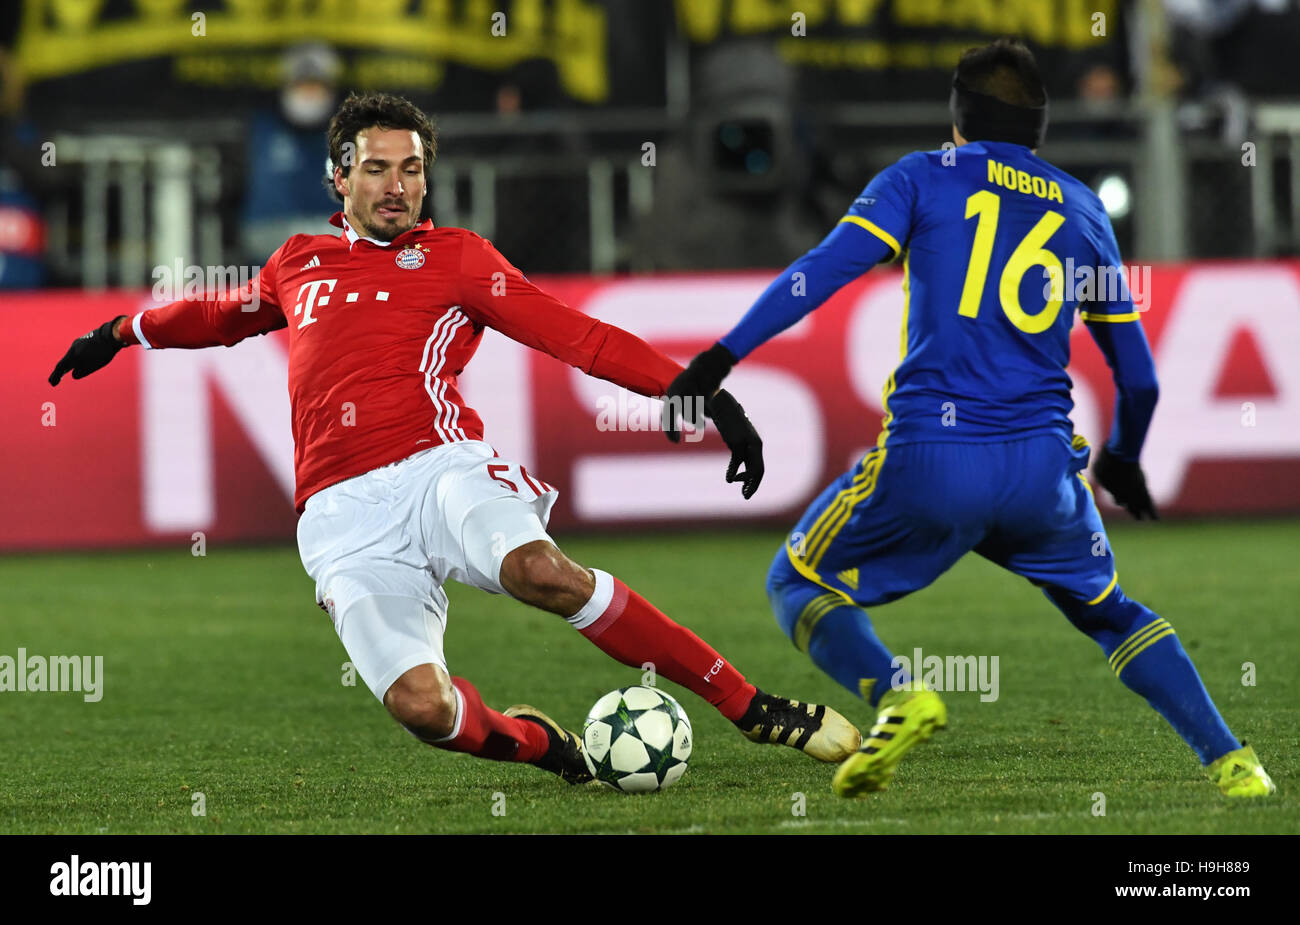 Rostov-on-Don, Russia. 23rd Nov, 2016. Mats Hummels from FC Bayern Munich and Christian Noboa from FC Rostov vie for the ball during the Champions League soccer match between FC Rostov and FC Bayern Munich in the Olimp-2 Stadium in Rostov-on-Don, Russia, 23 November 2016. Photo: Peter Kneffel/dpa/Alamy Live News Stock Photo